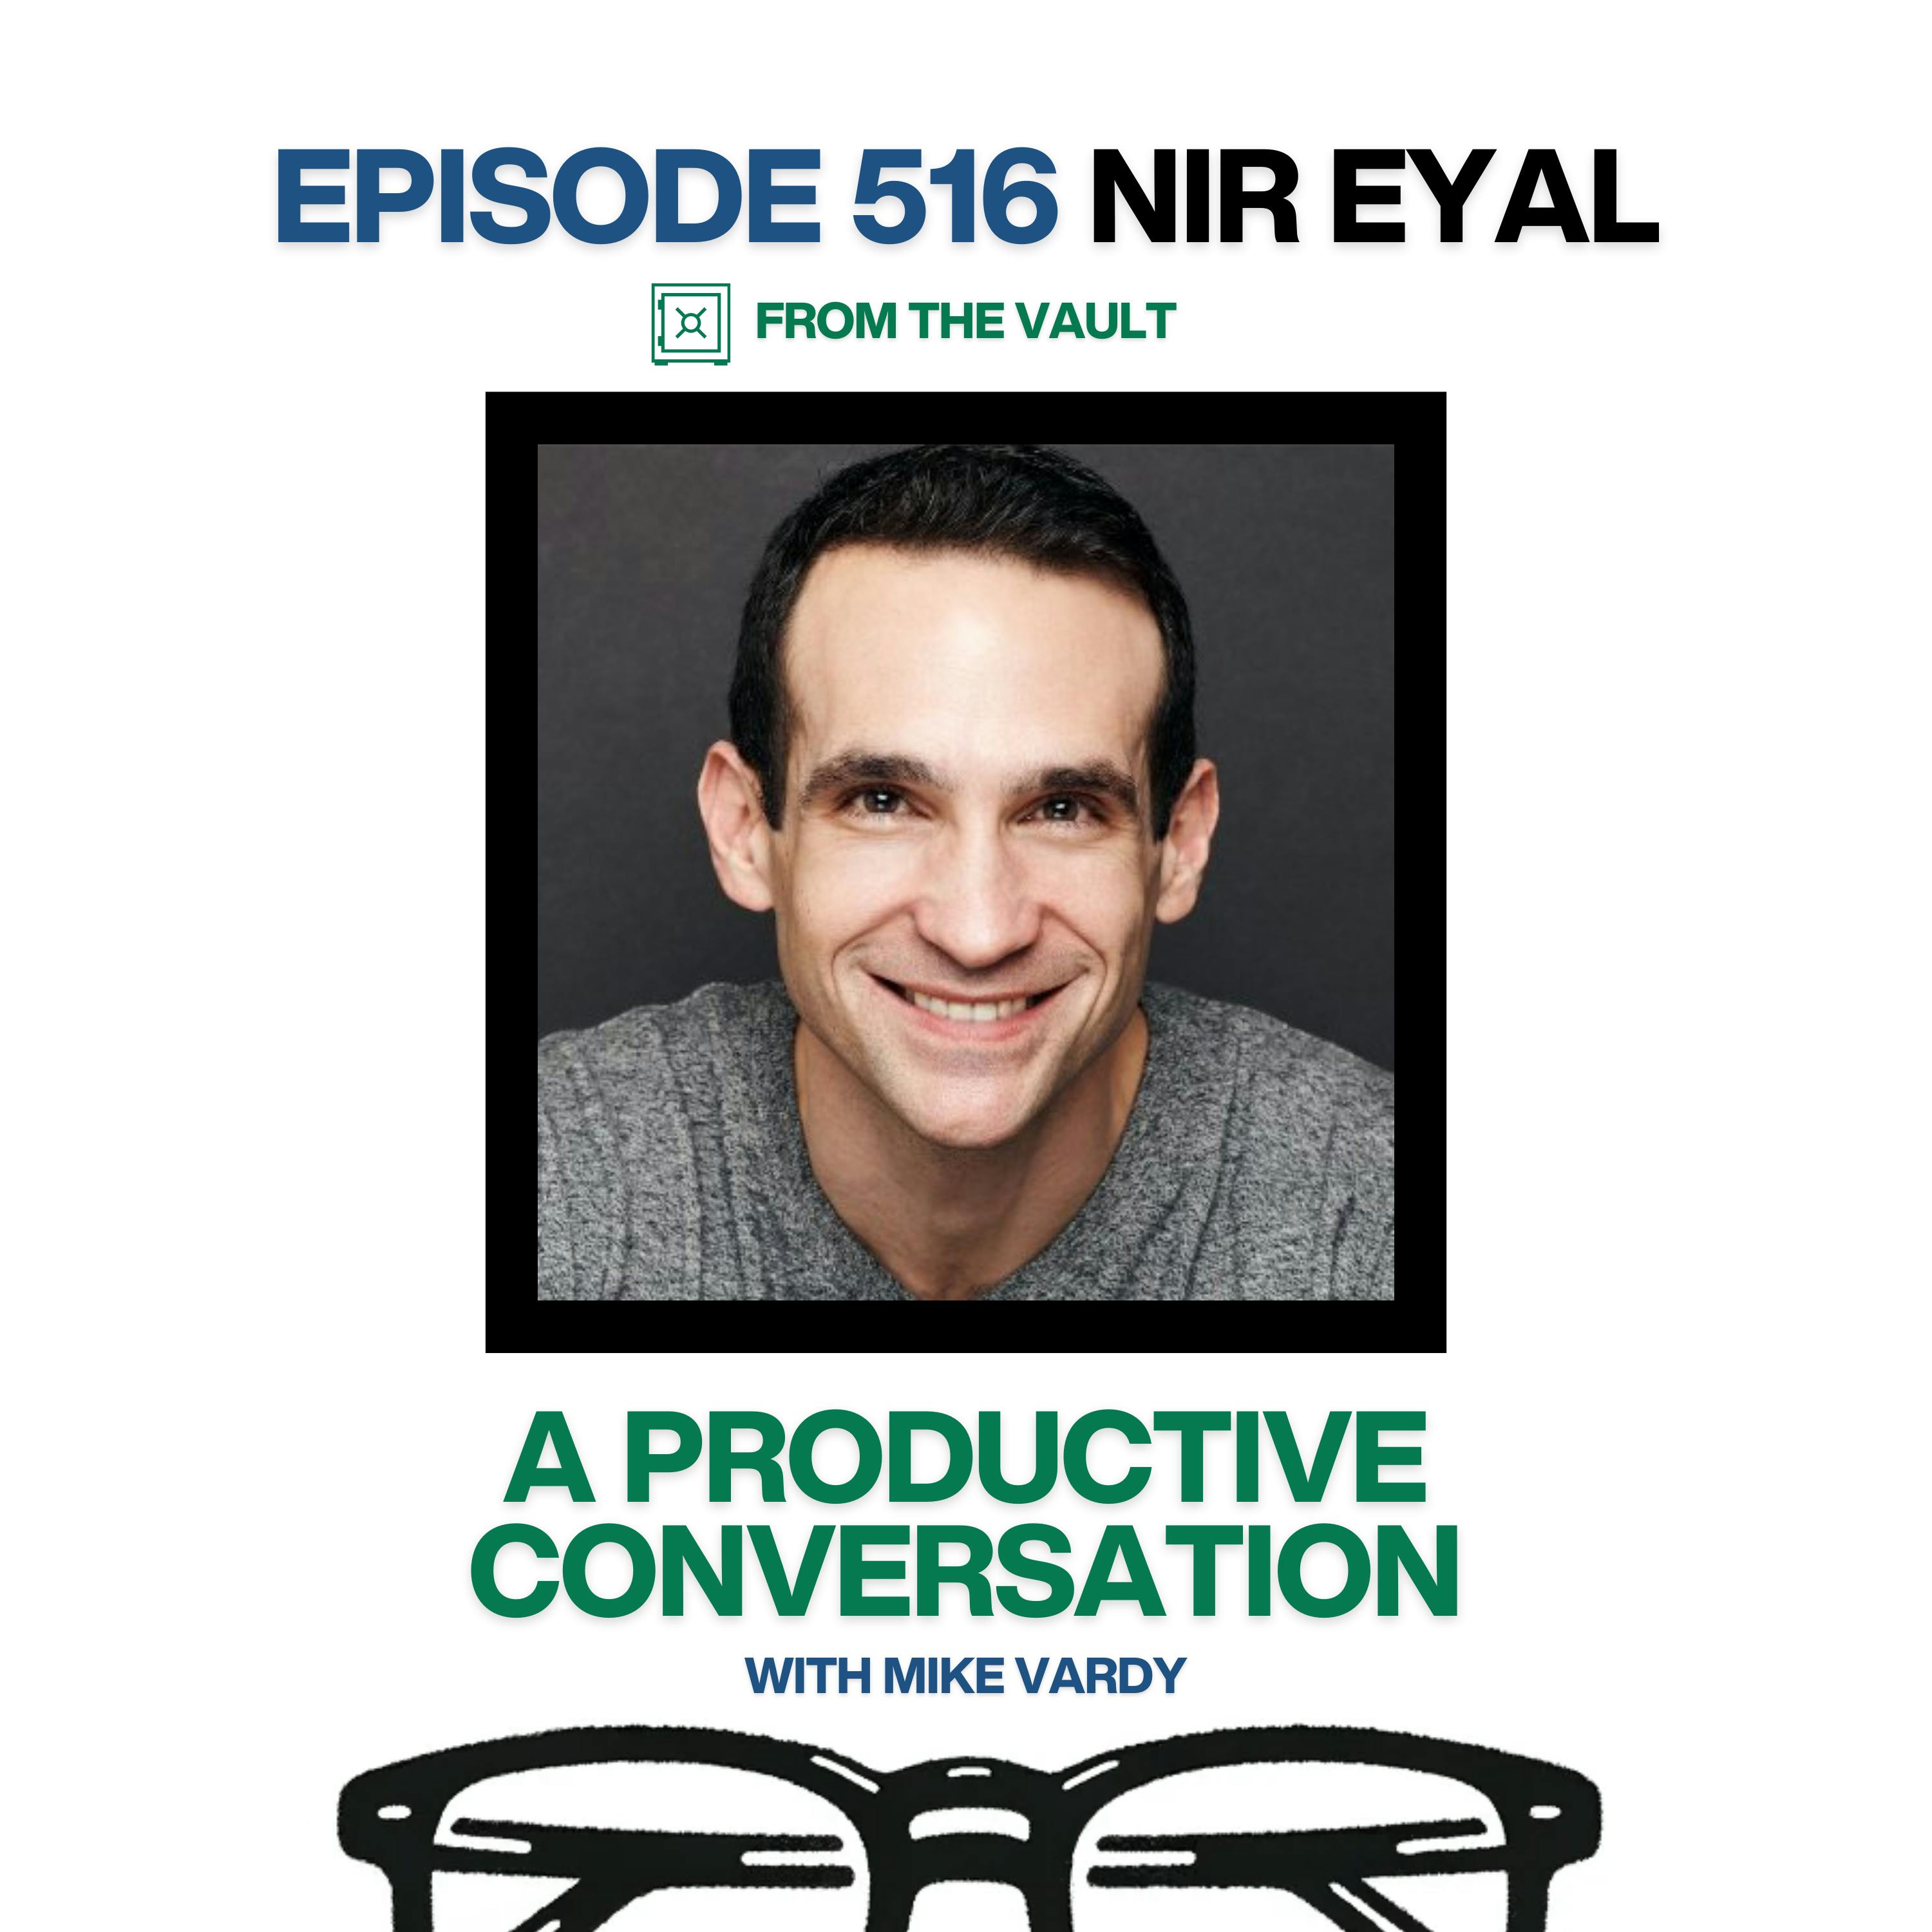 FROM THE VAULT: Nir Eyal Talks About Mastering Focus By Being Indistractable